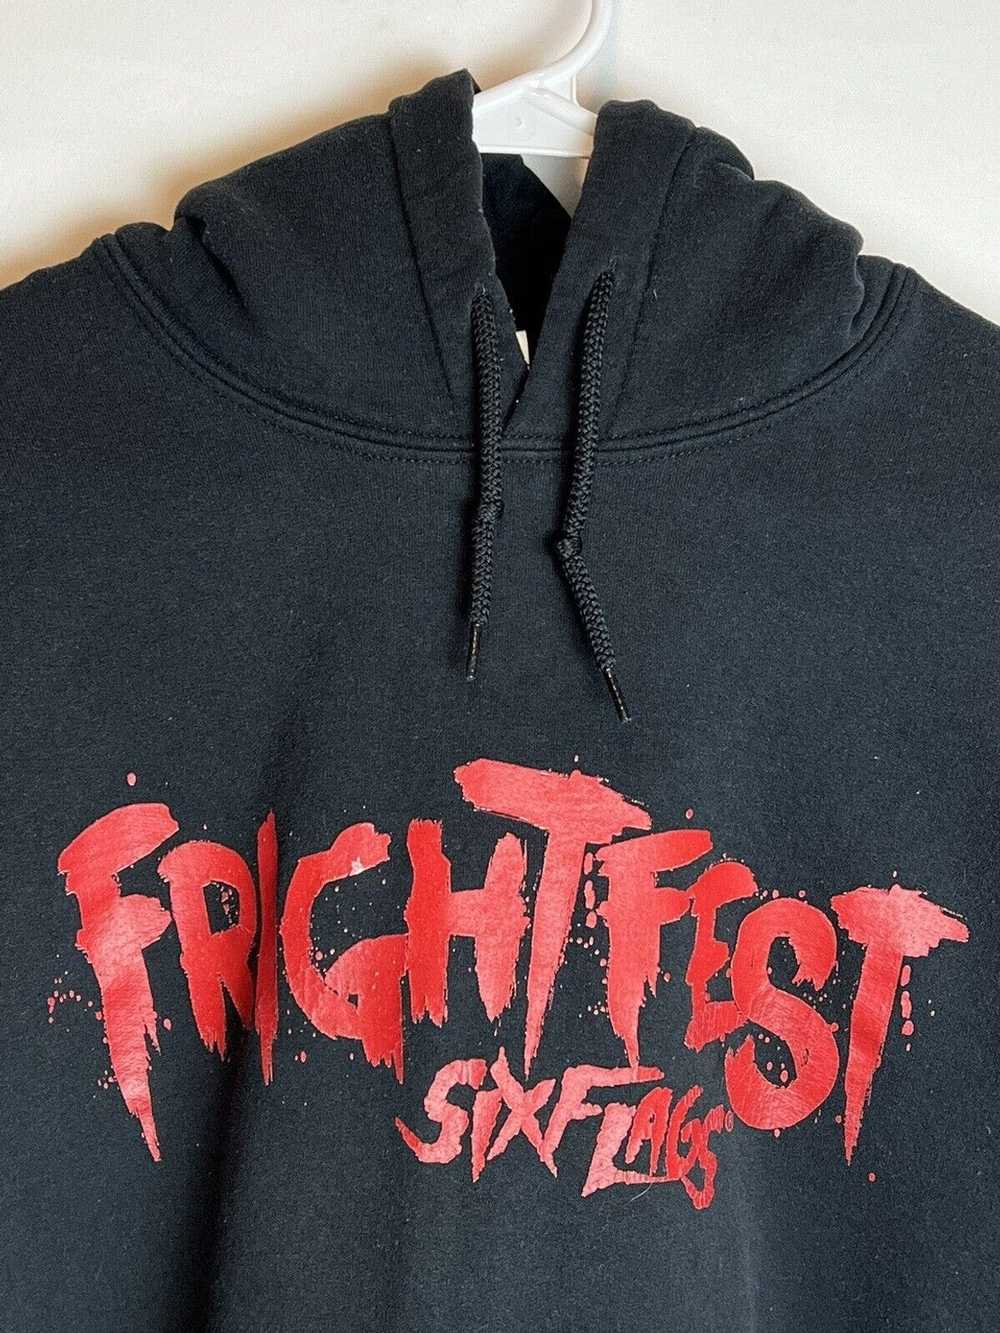 Other Six Flags Fright Fest Vintage Halloween Clo… - image 5